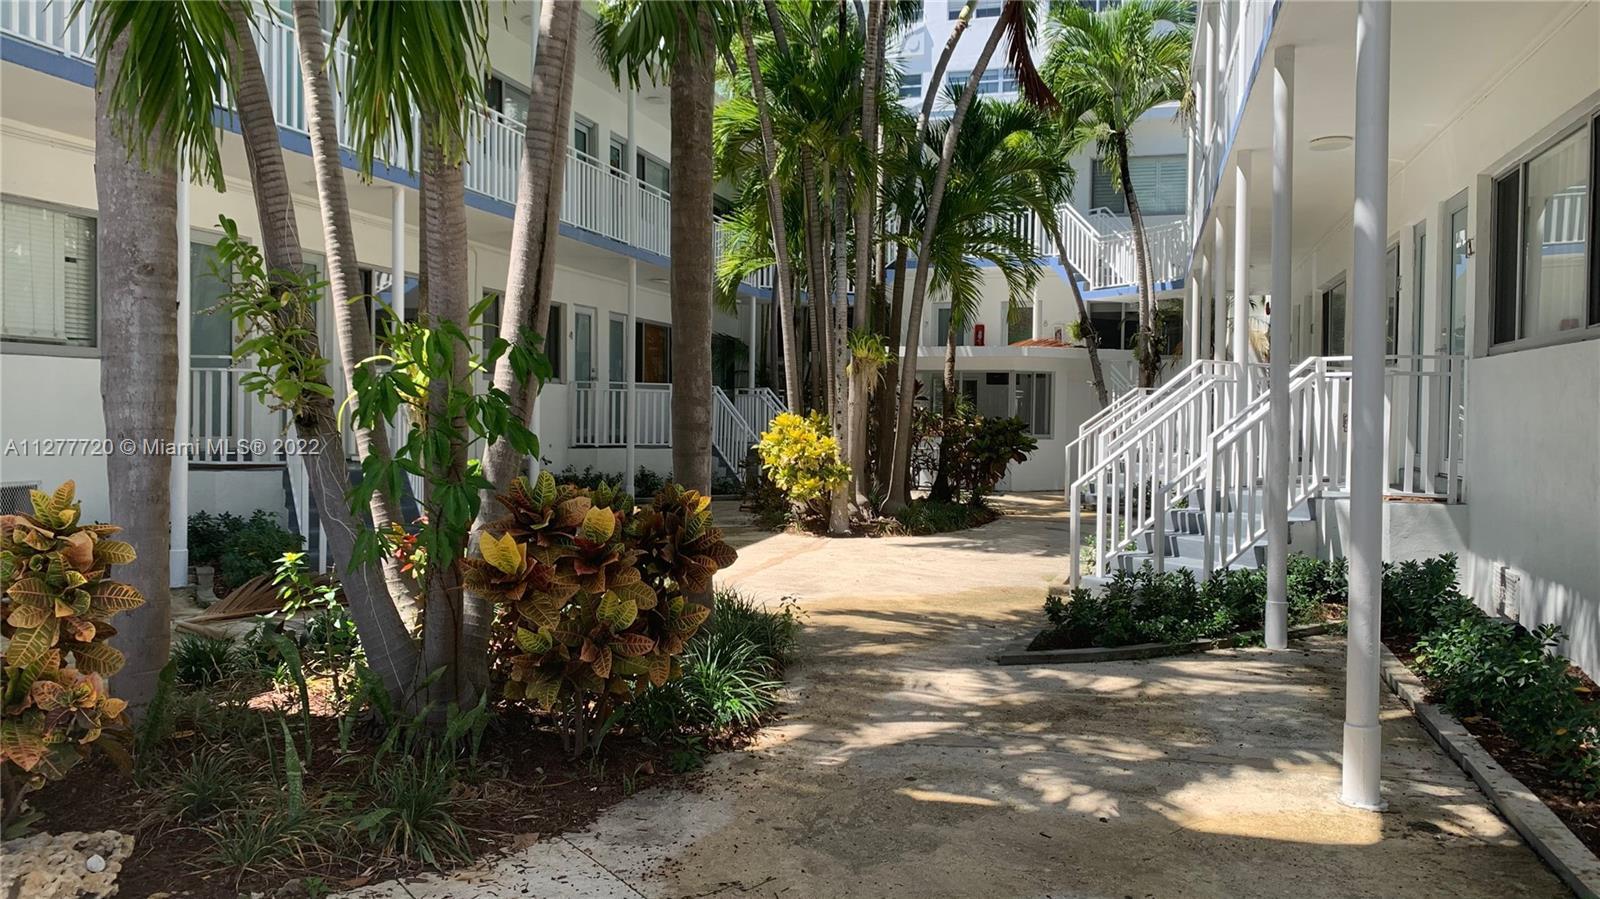 Stylish 1 bedroom unit in the heart of South Beach. located on a quiet street only steps from the oc